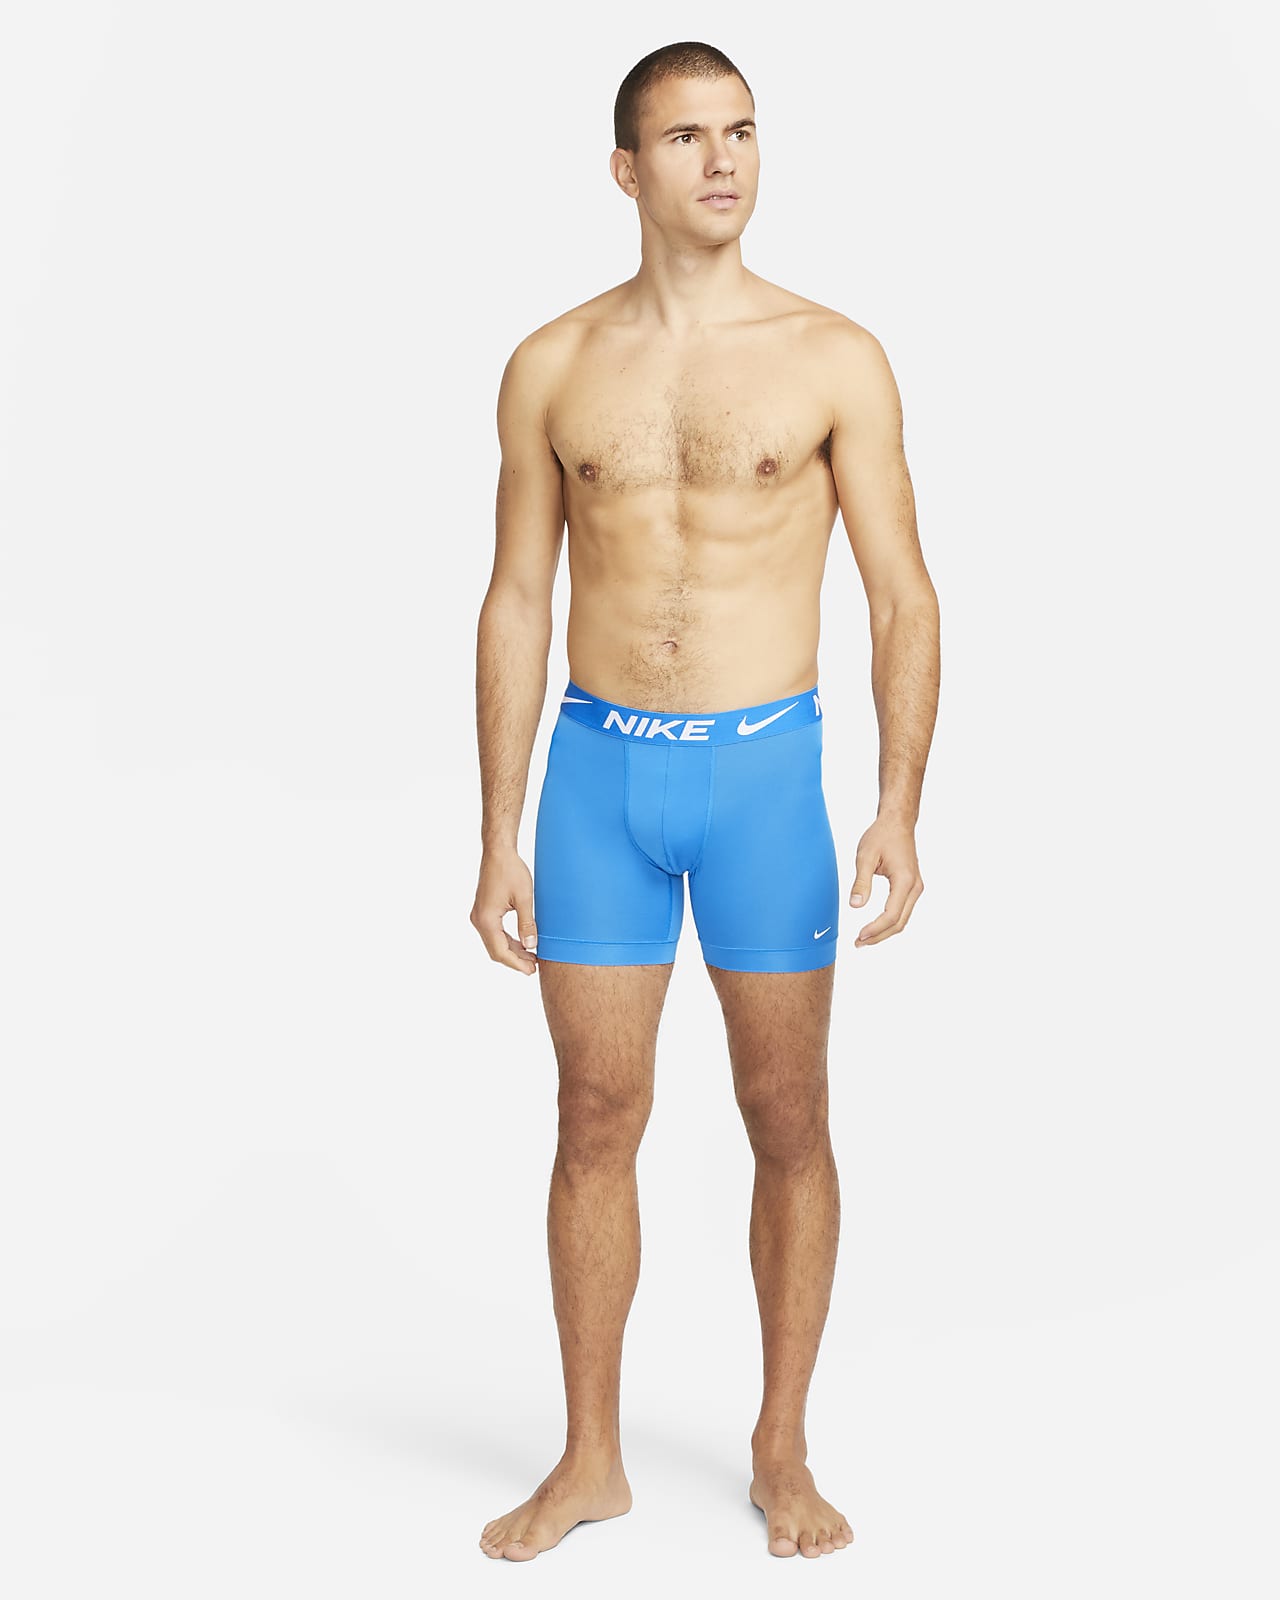 Essential Stretch Micro Boxer Briefs - 3 Pack by Nike